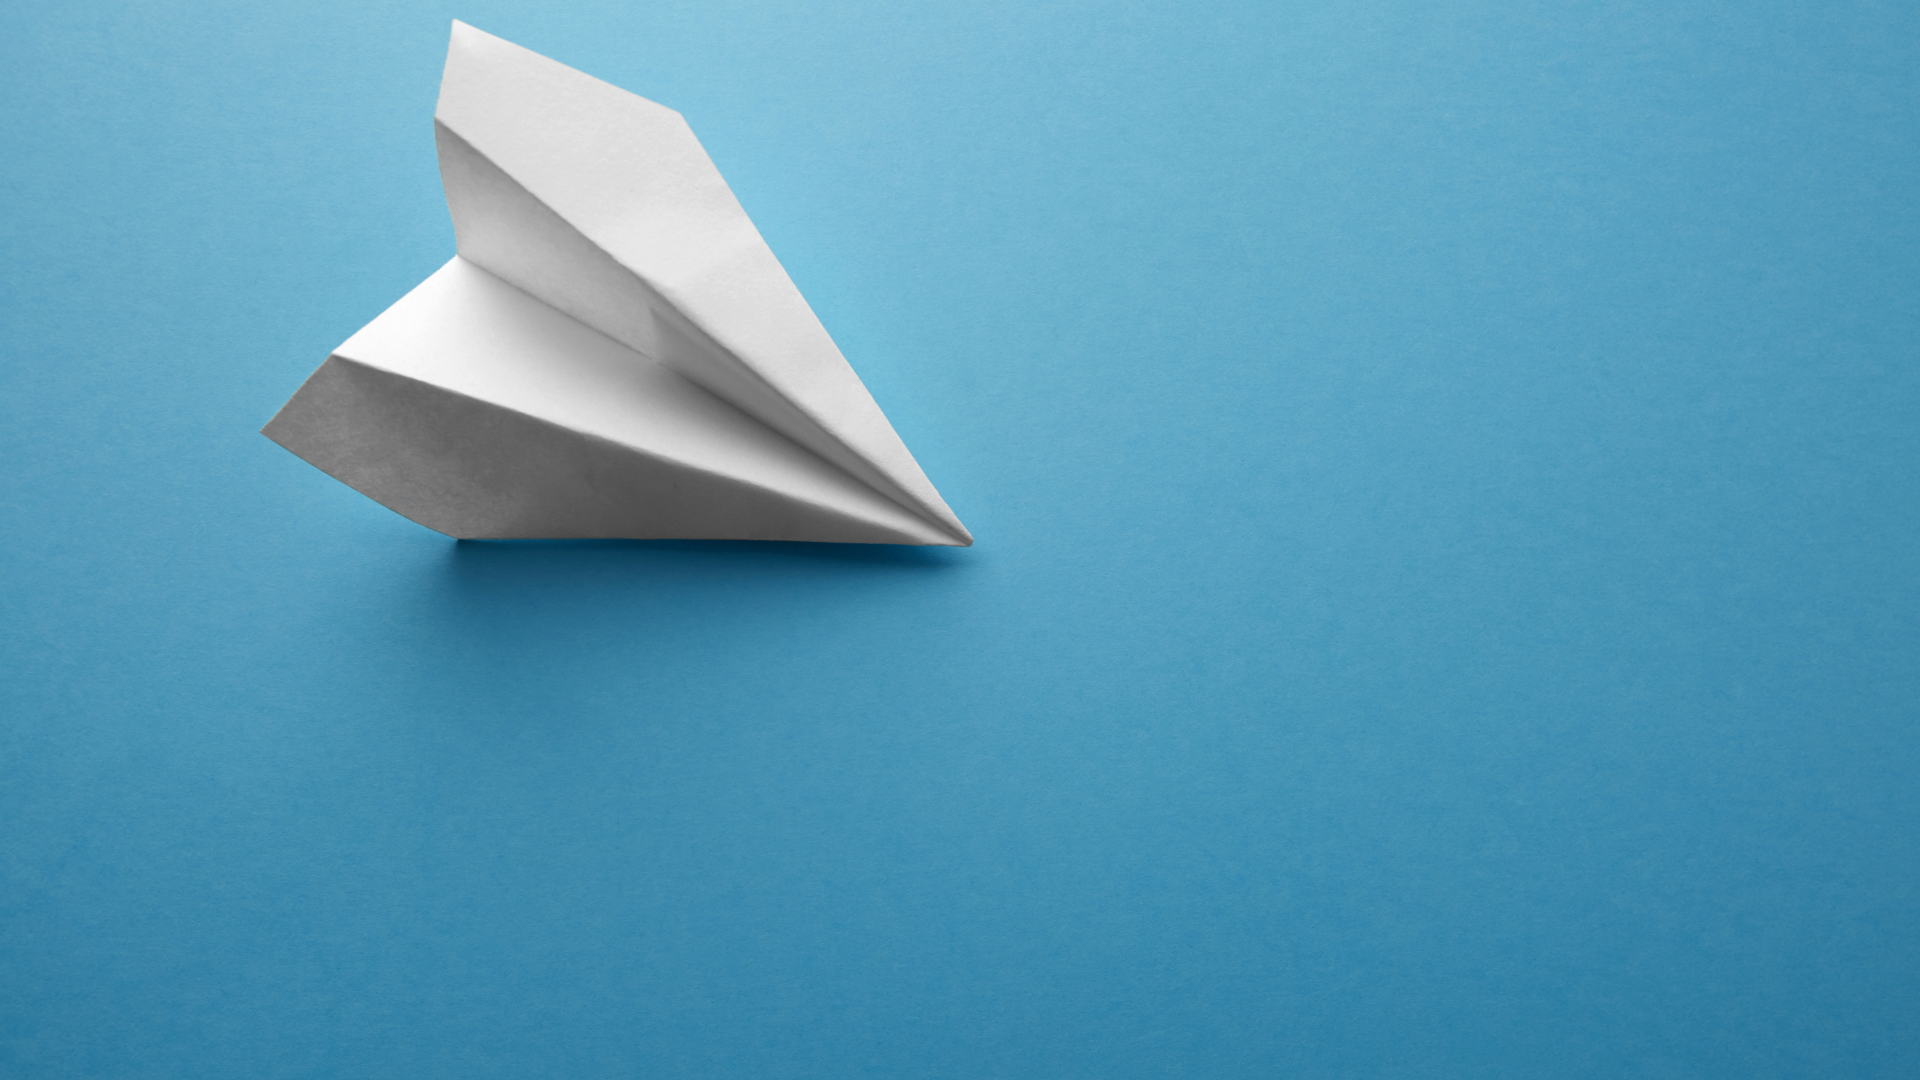 A White Paper Airplane On A Blue Background